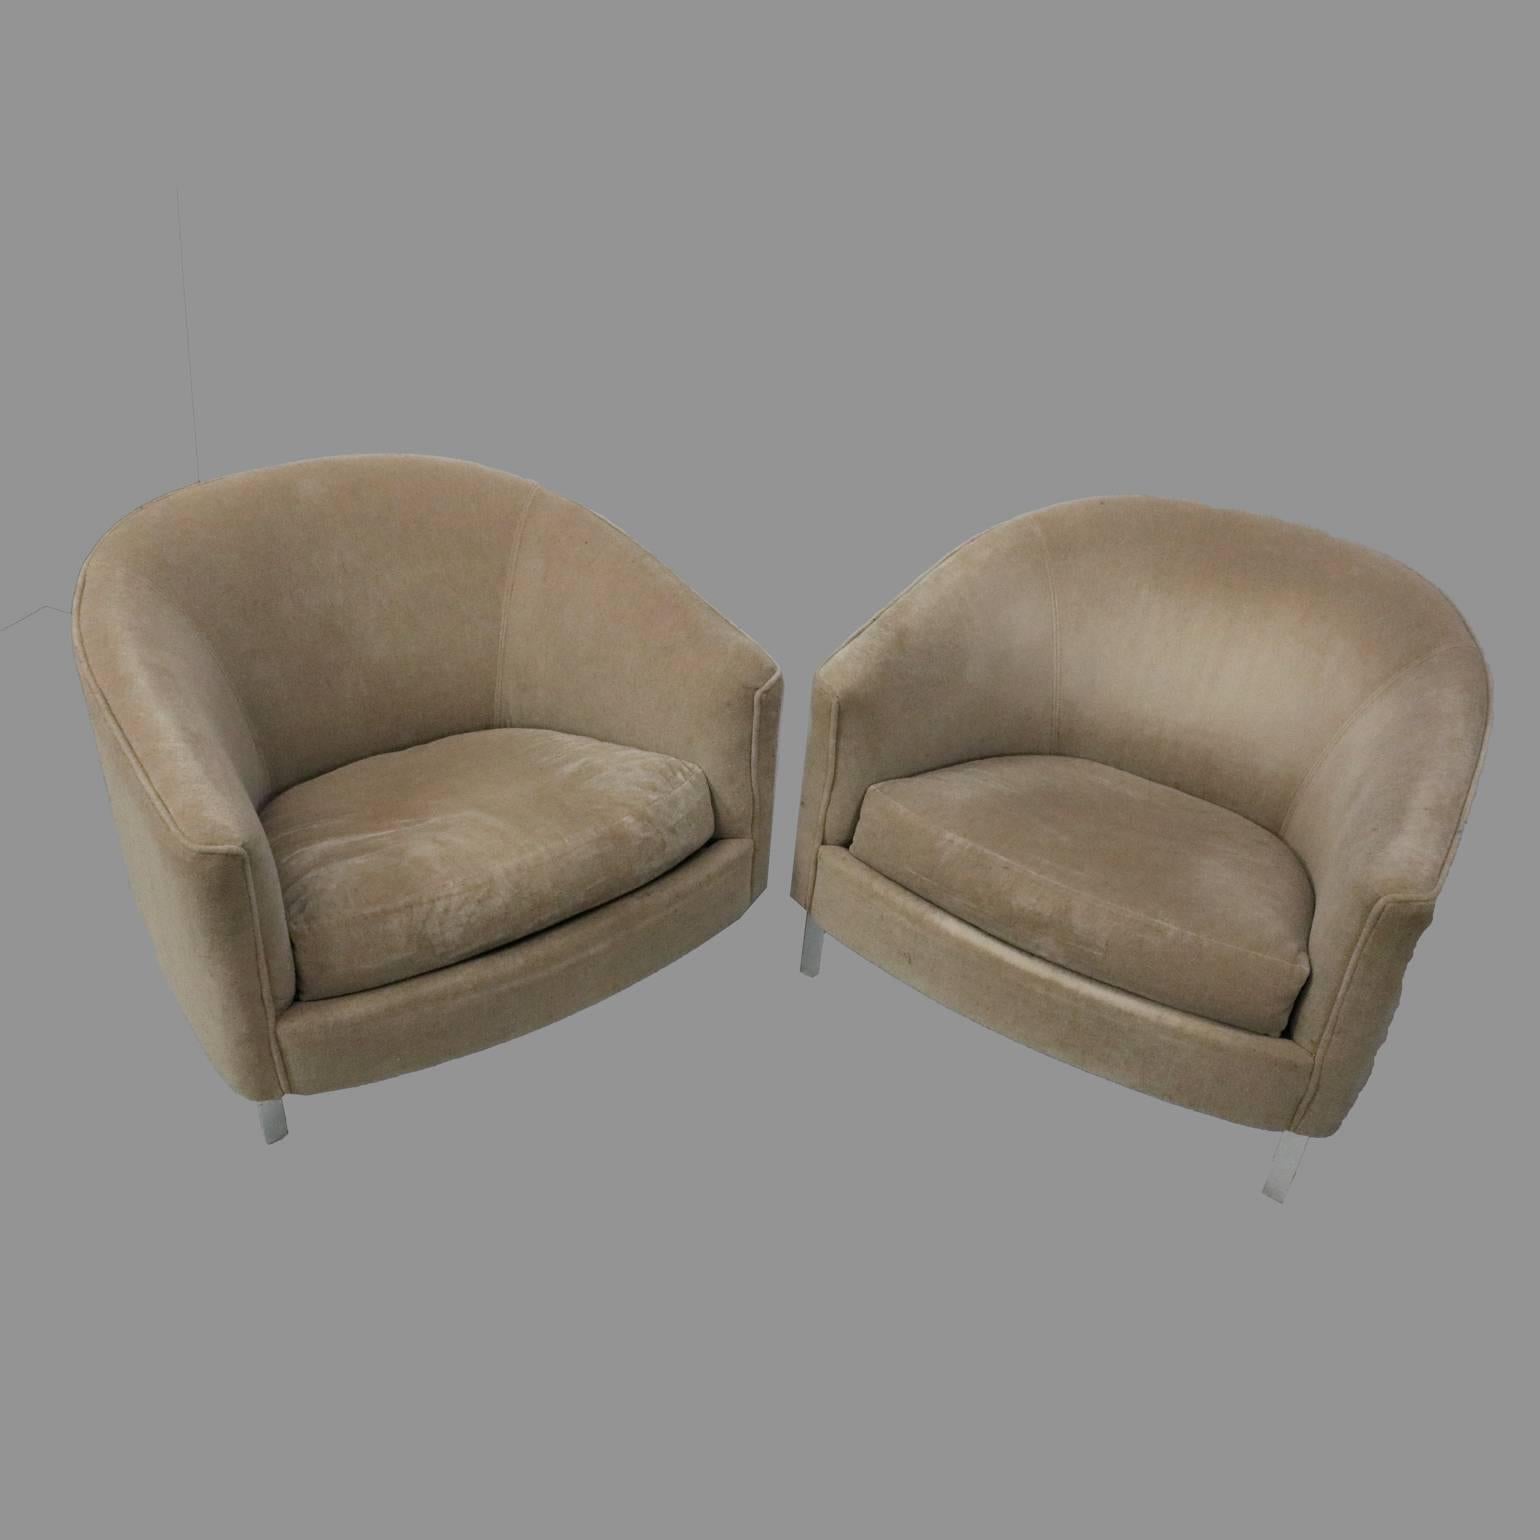 Pair of Mid-Century Modern barrel back upholstered club chairs supported on chrome legs, 20th century

Measures: 26" H x 33" W x 31" D, 15" seat height.